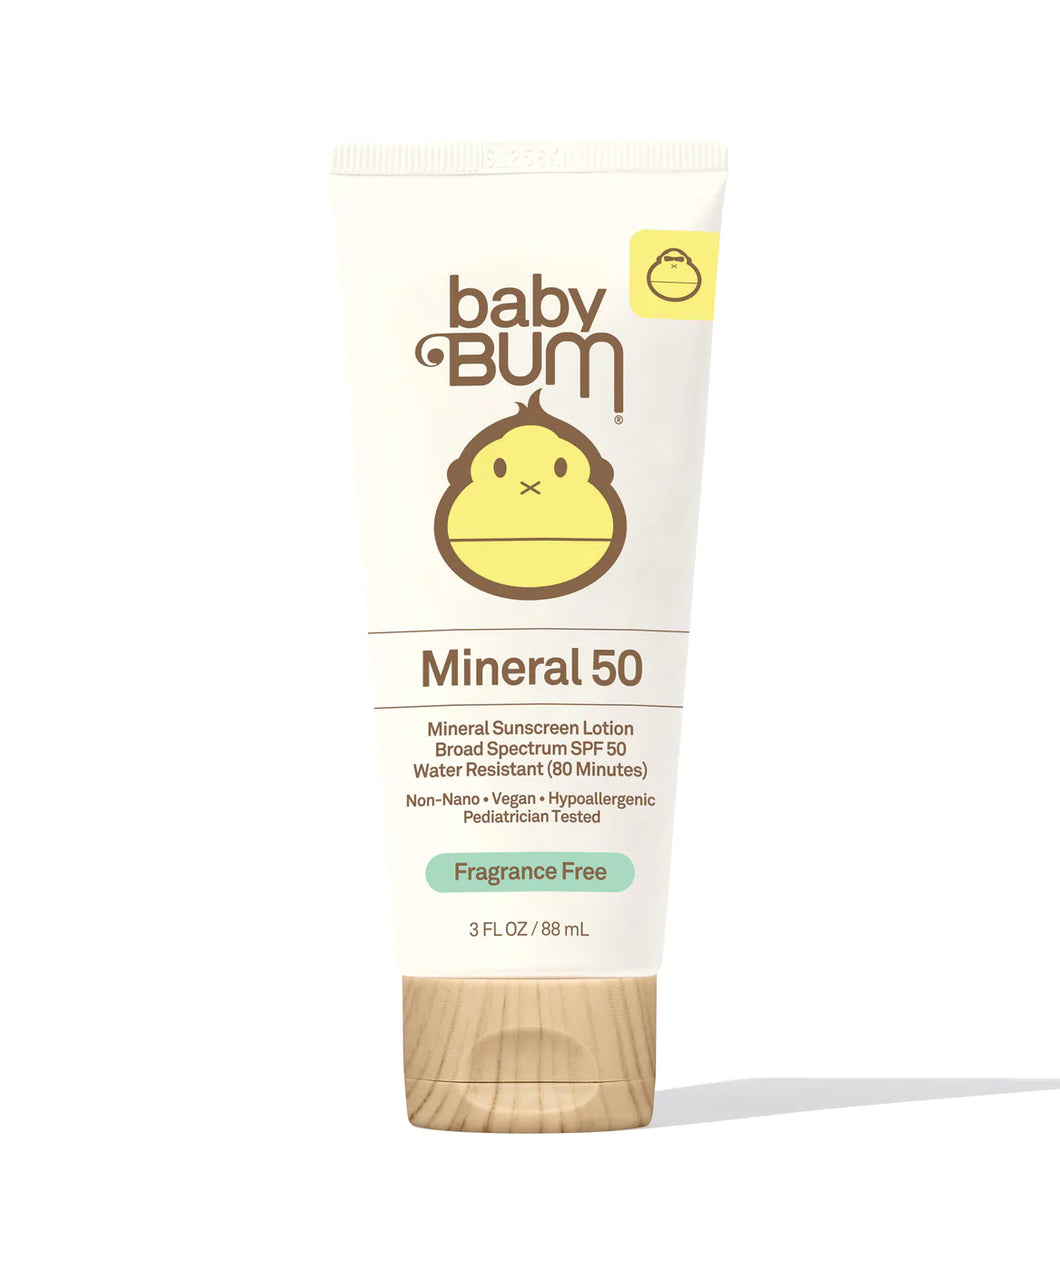 Baby Bum: Mineral SPF 50 Sunscreen Lotion - Fragrance Free